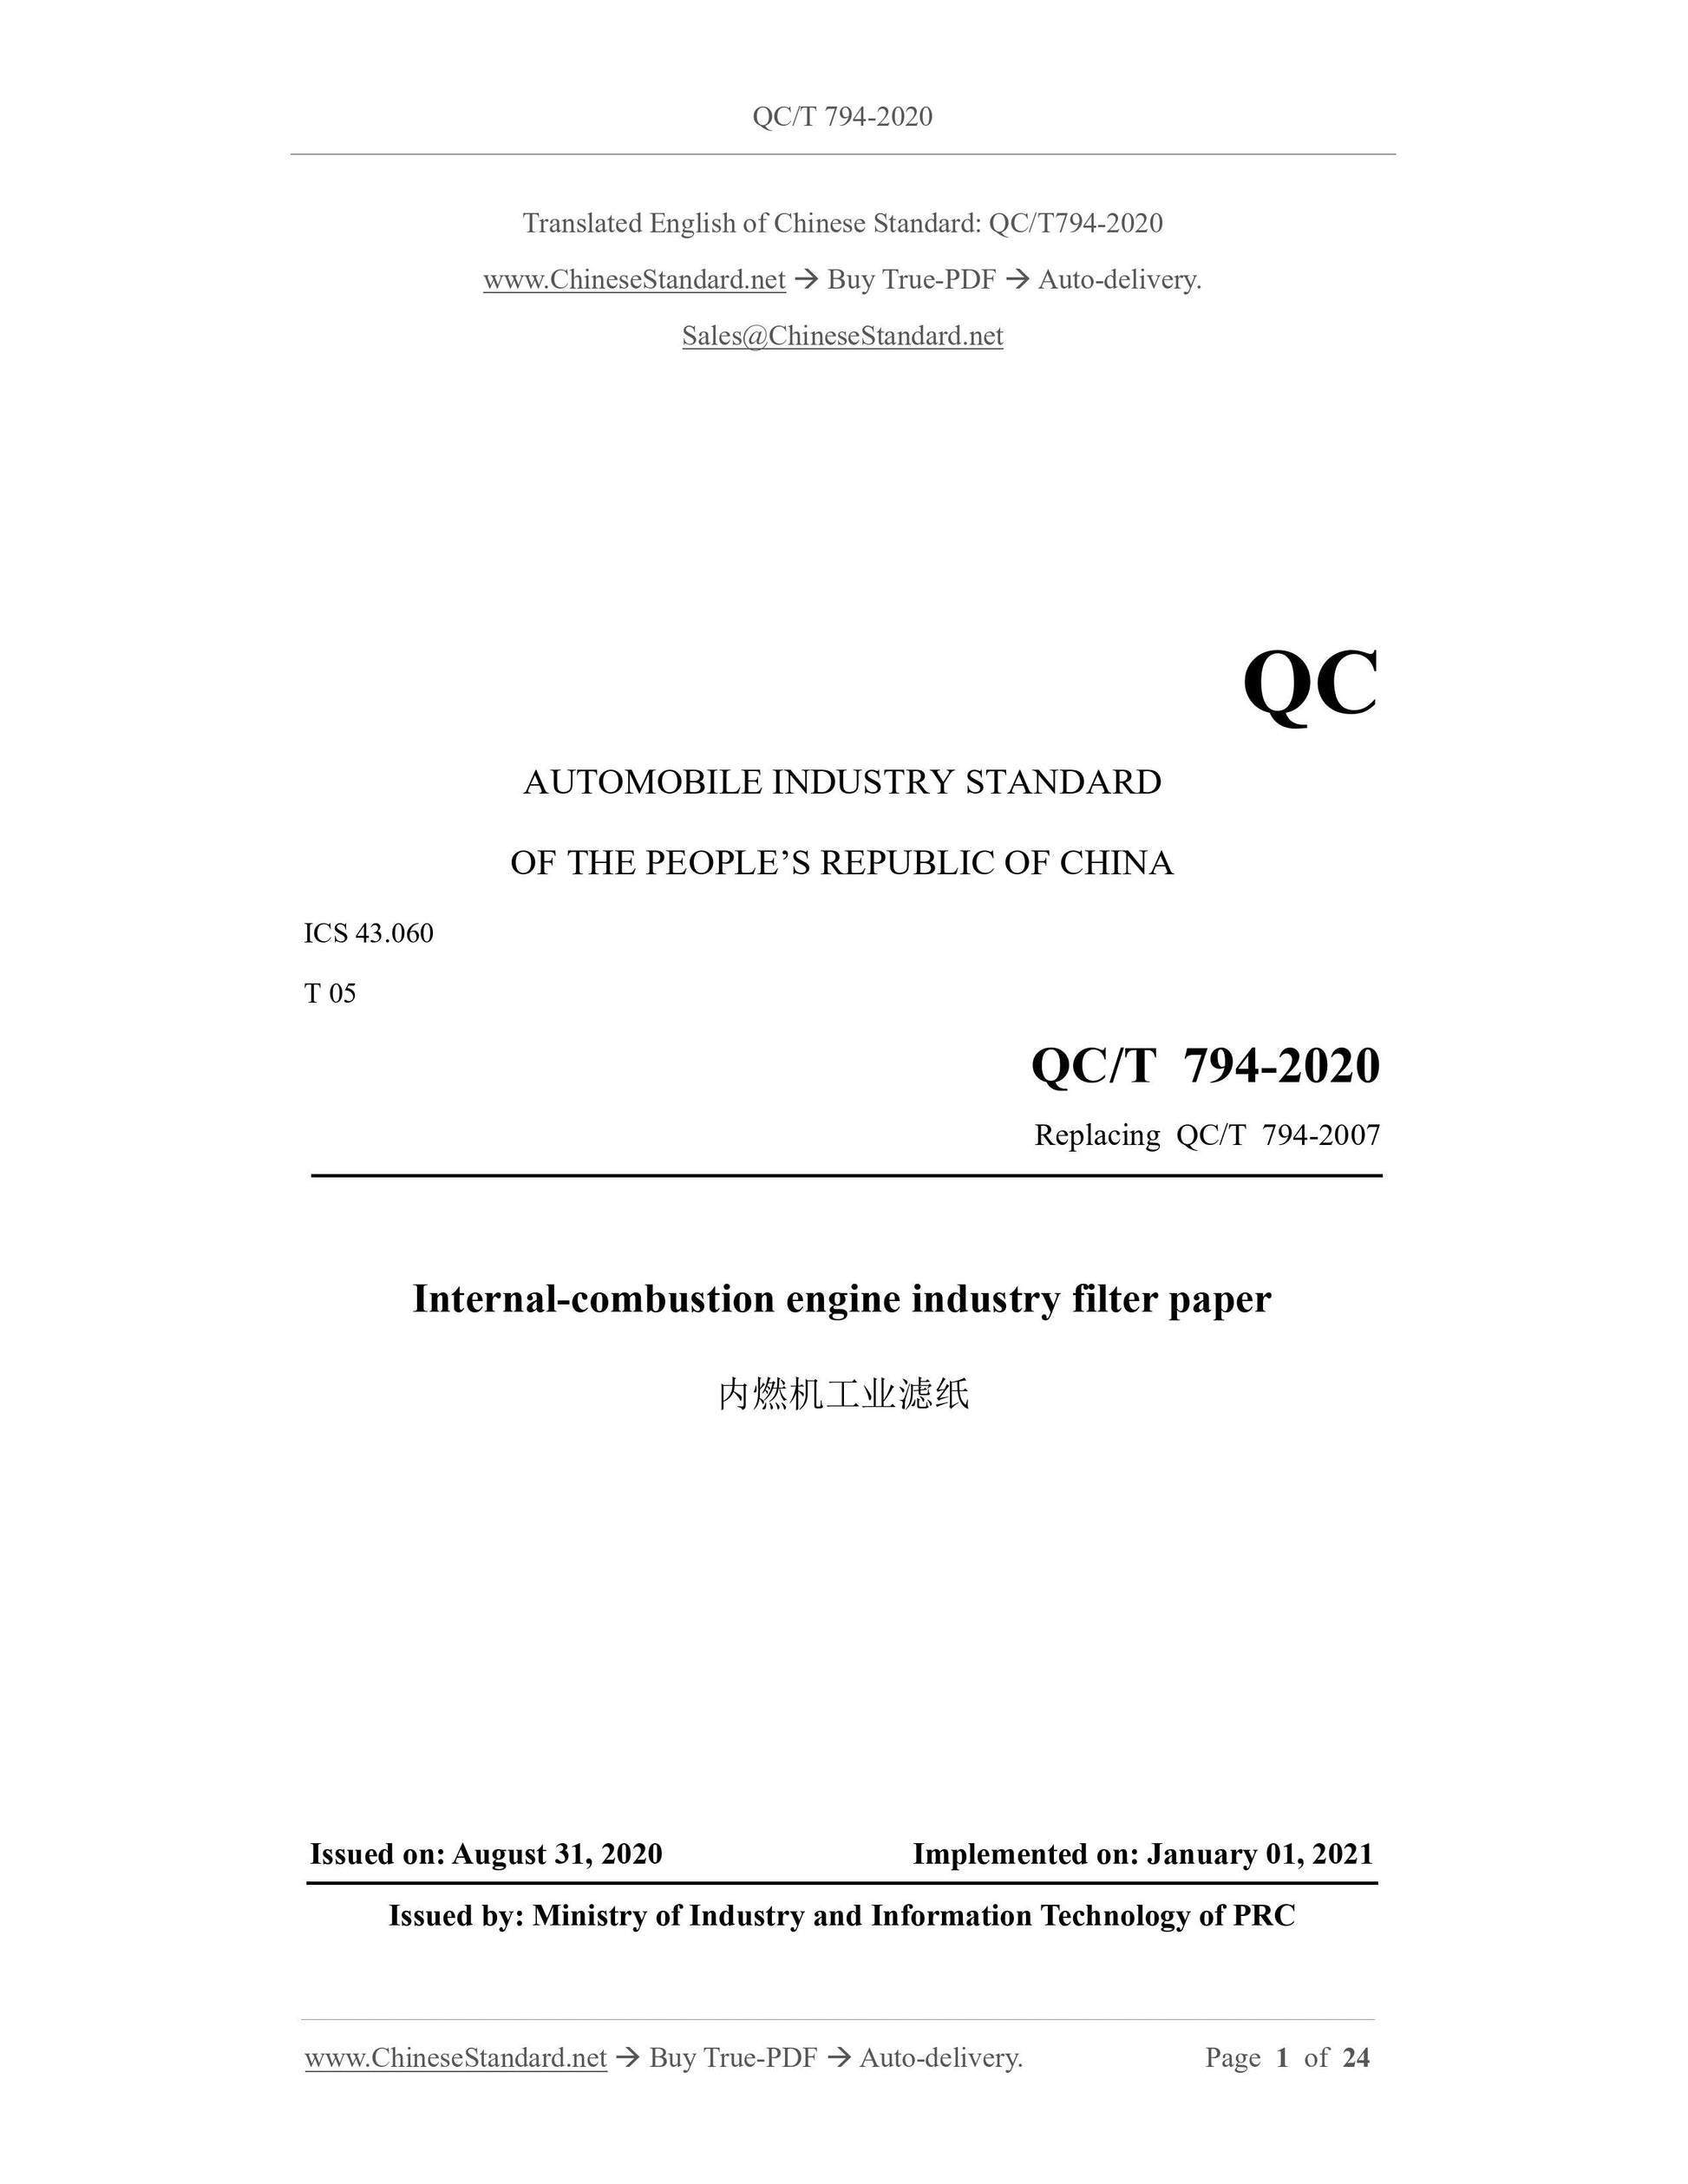 QC/T 794-2020 Page 1